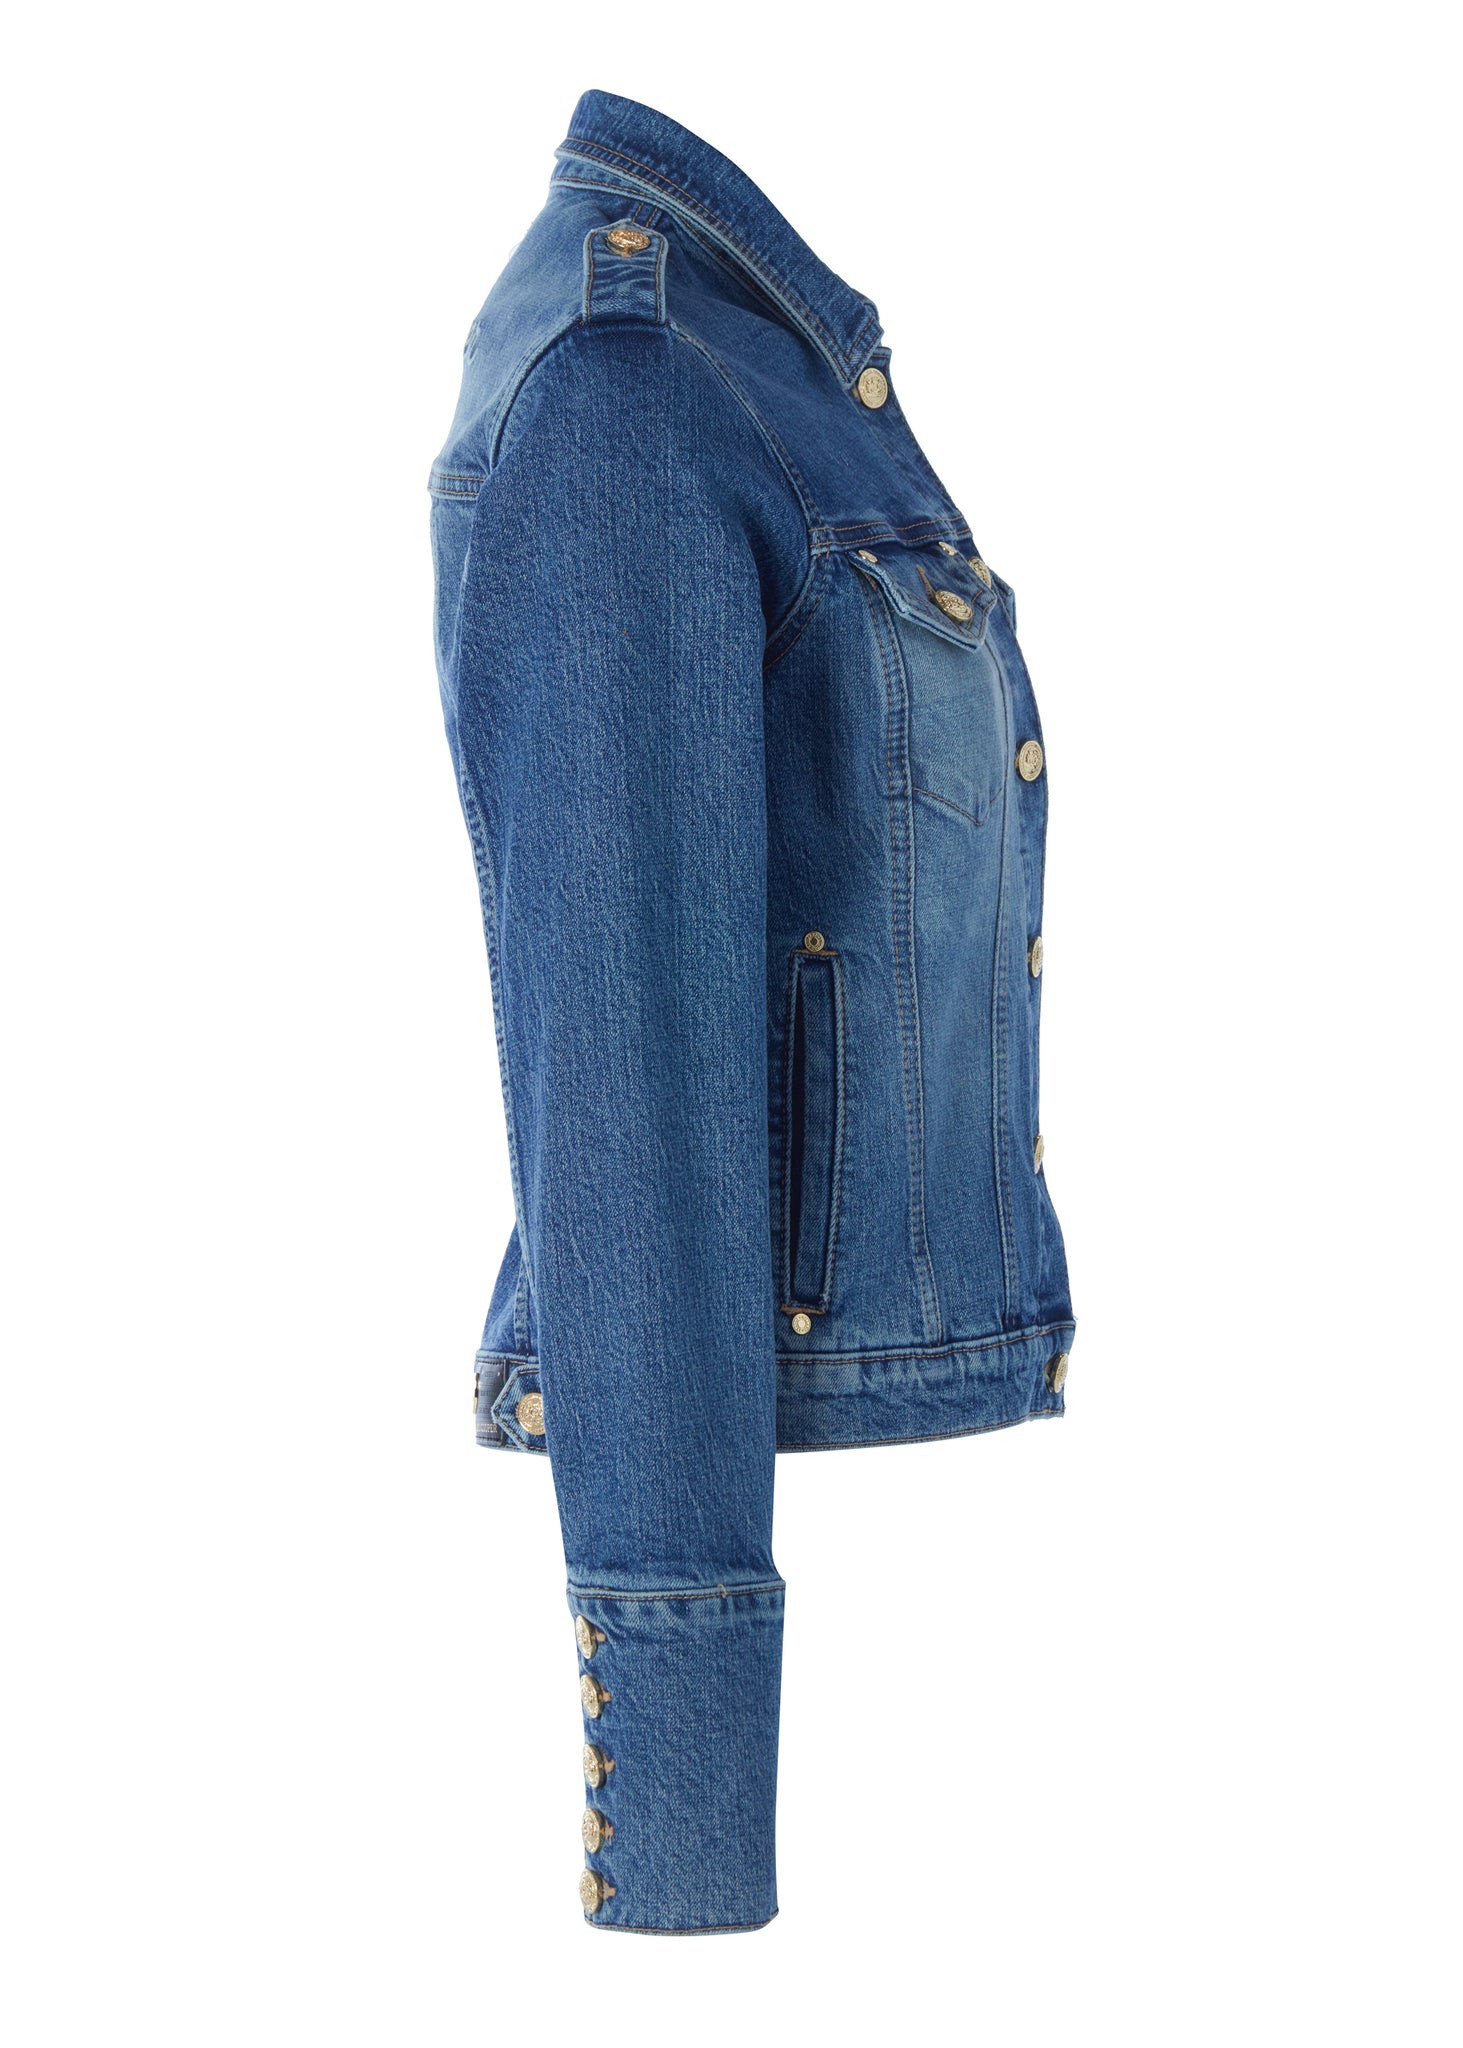 side of classic indigo denim jacket waist length with gold buttons on front, pockets and cuffs with holland cooper embroidery on back